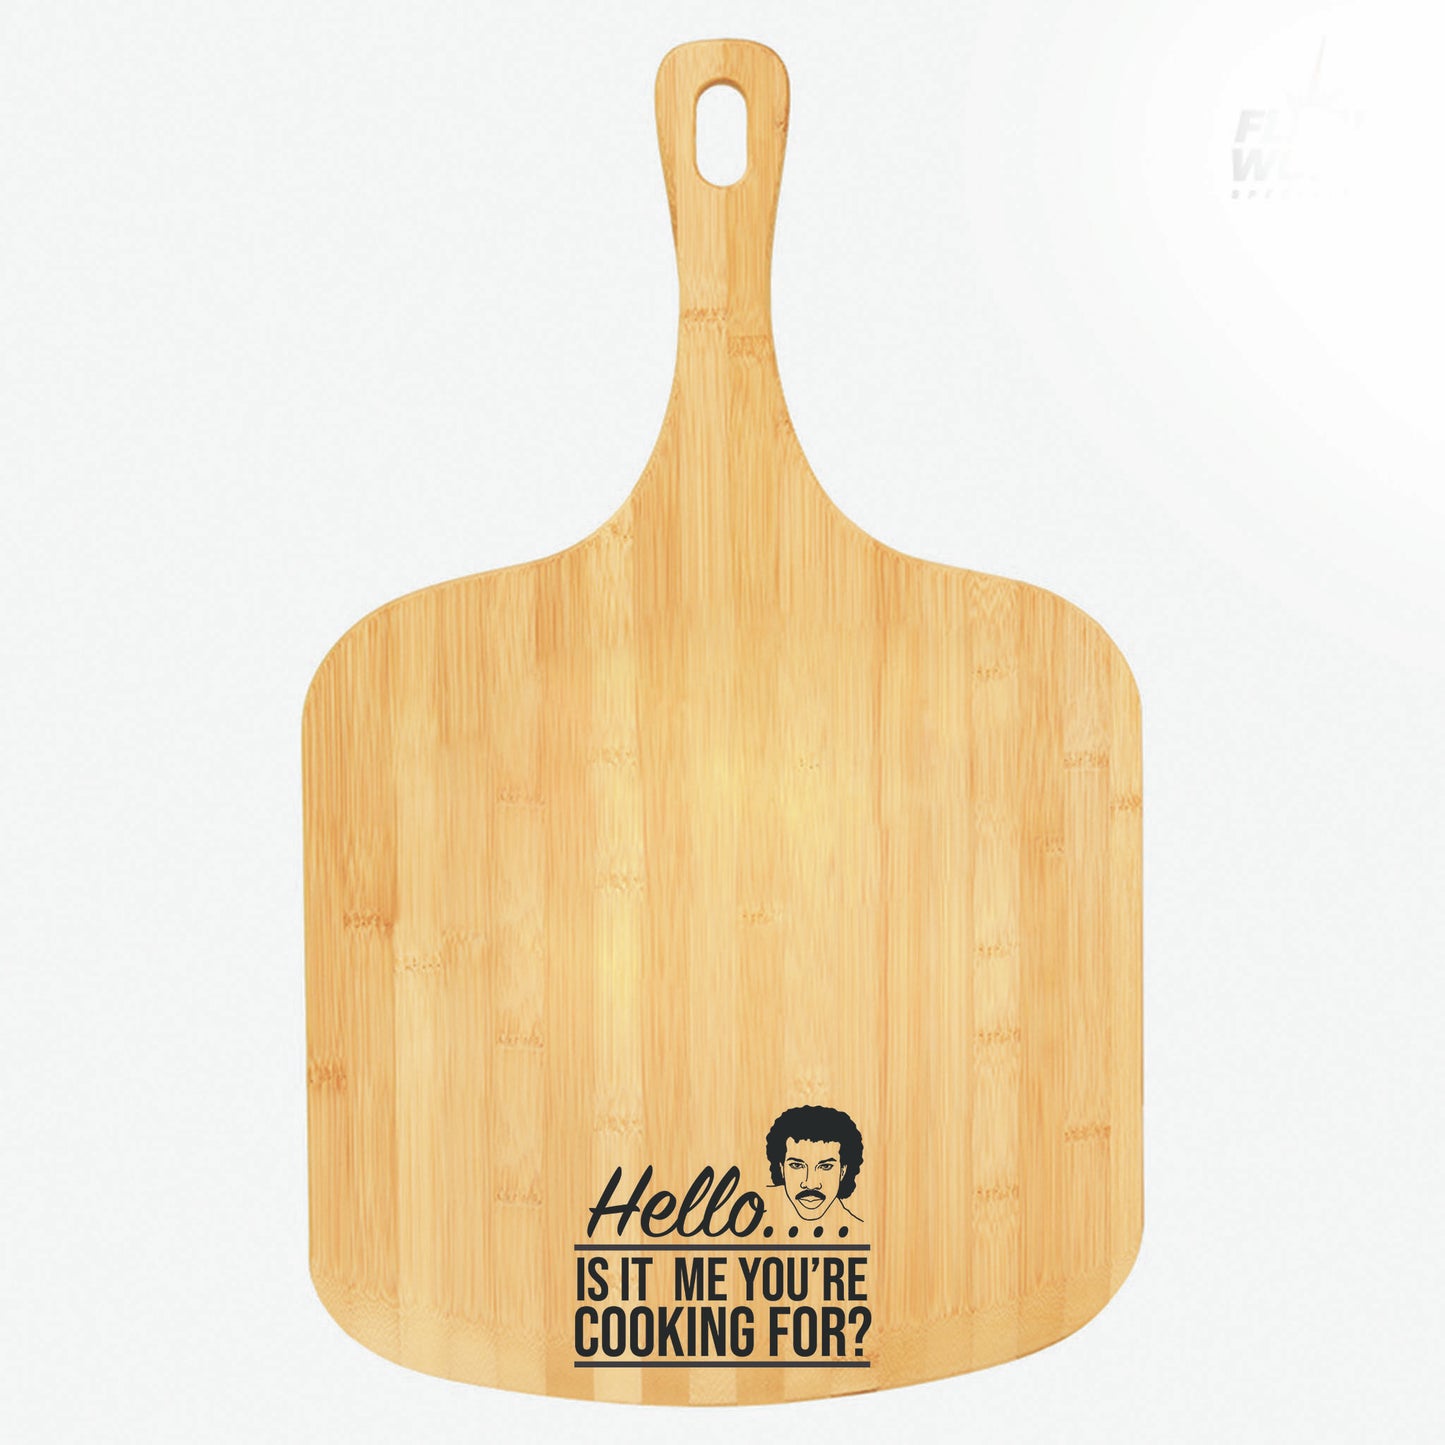 Lionel Richie Bamboo Cutting Boards | Hello Is It Me You're Cooking For Wood Cutting Boards | Different Styles Available